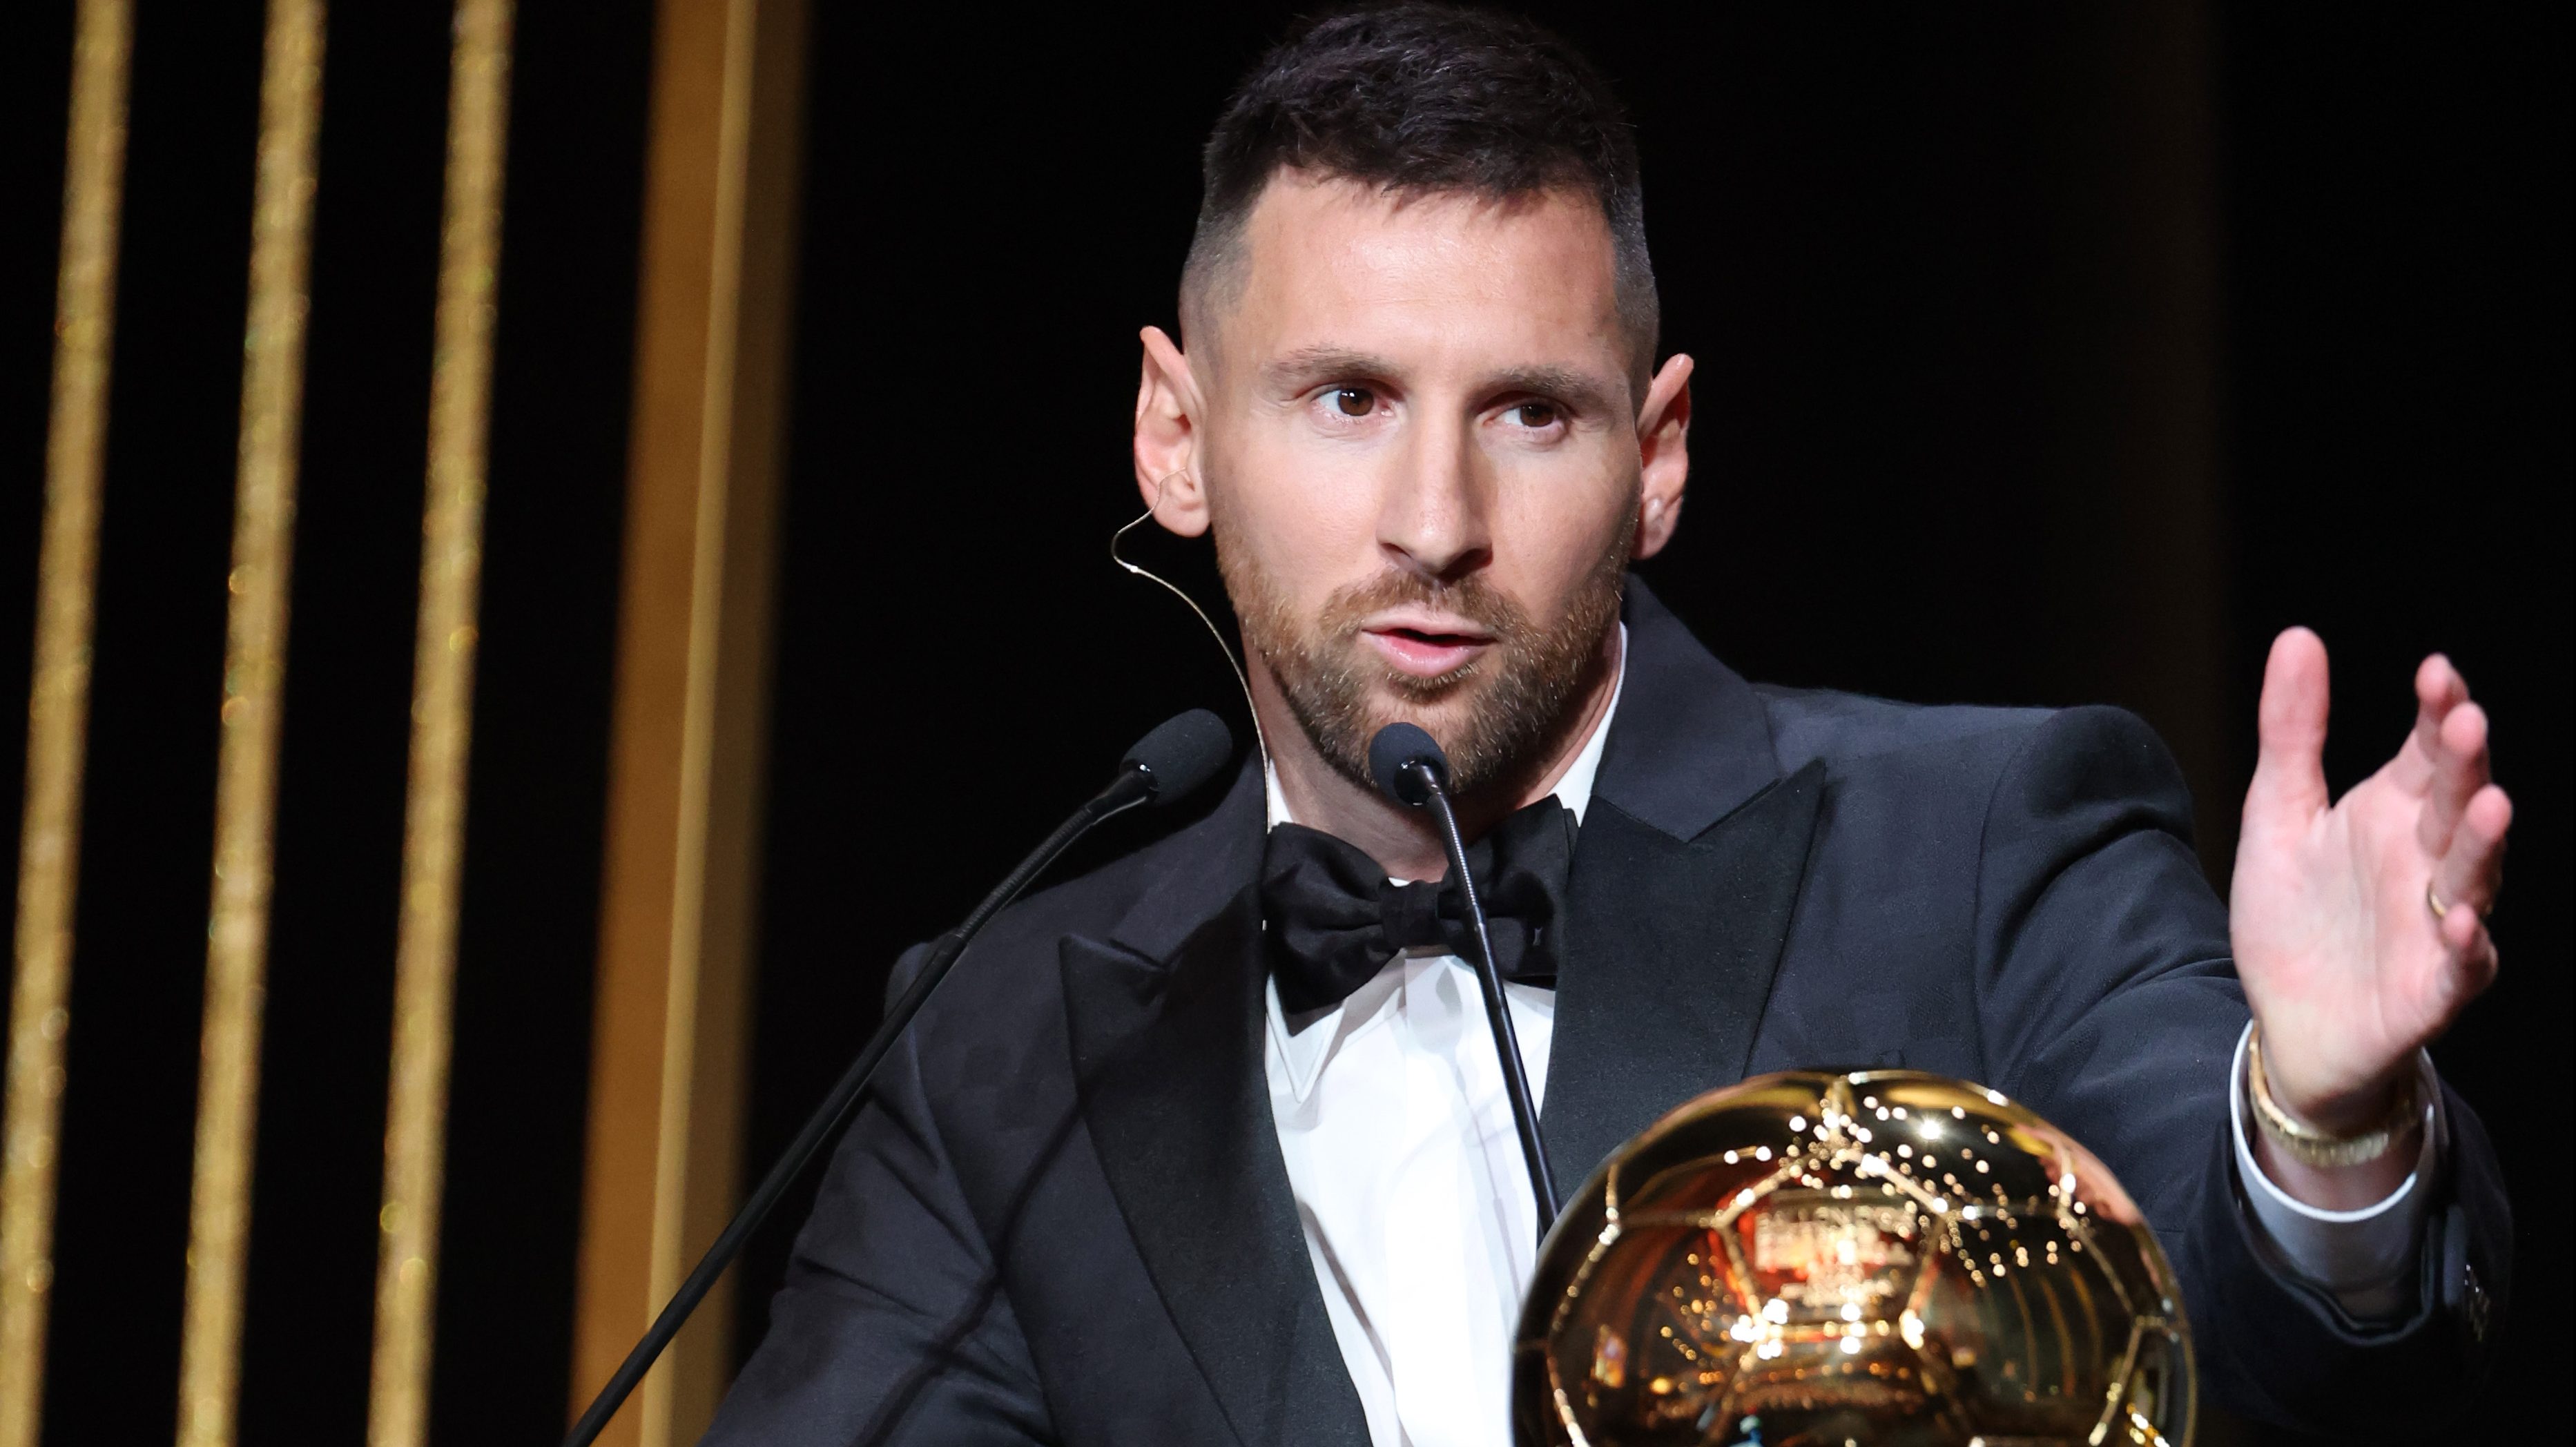 Messi wins record eighth Ballon d'Or for best player in the world